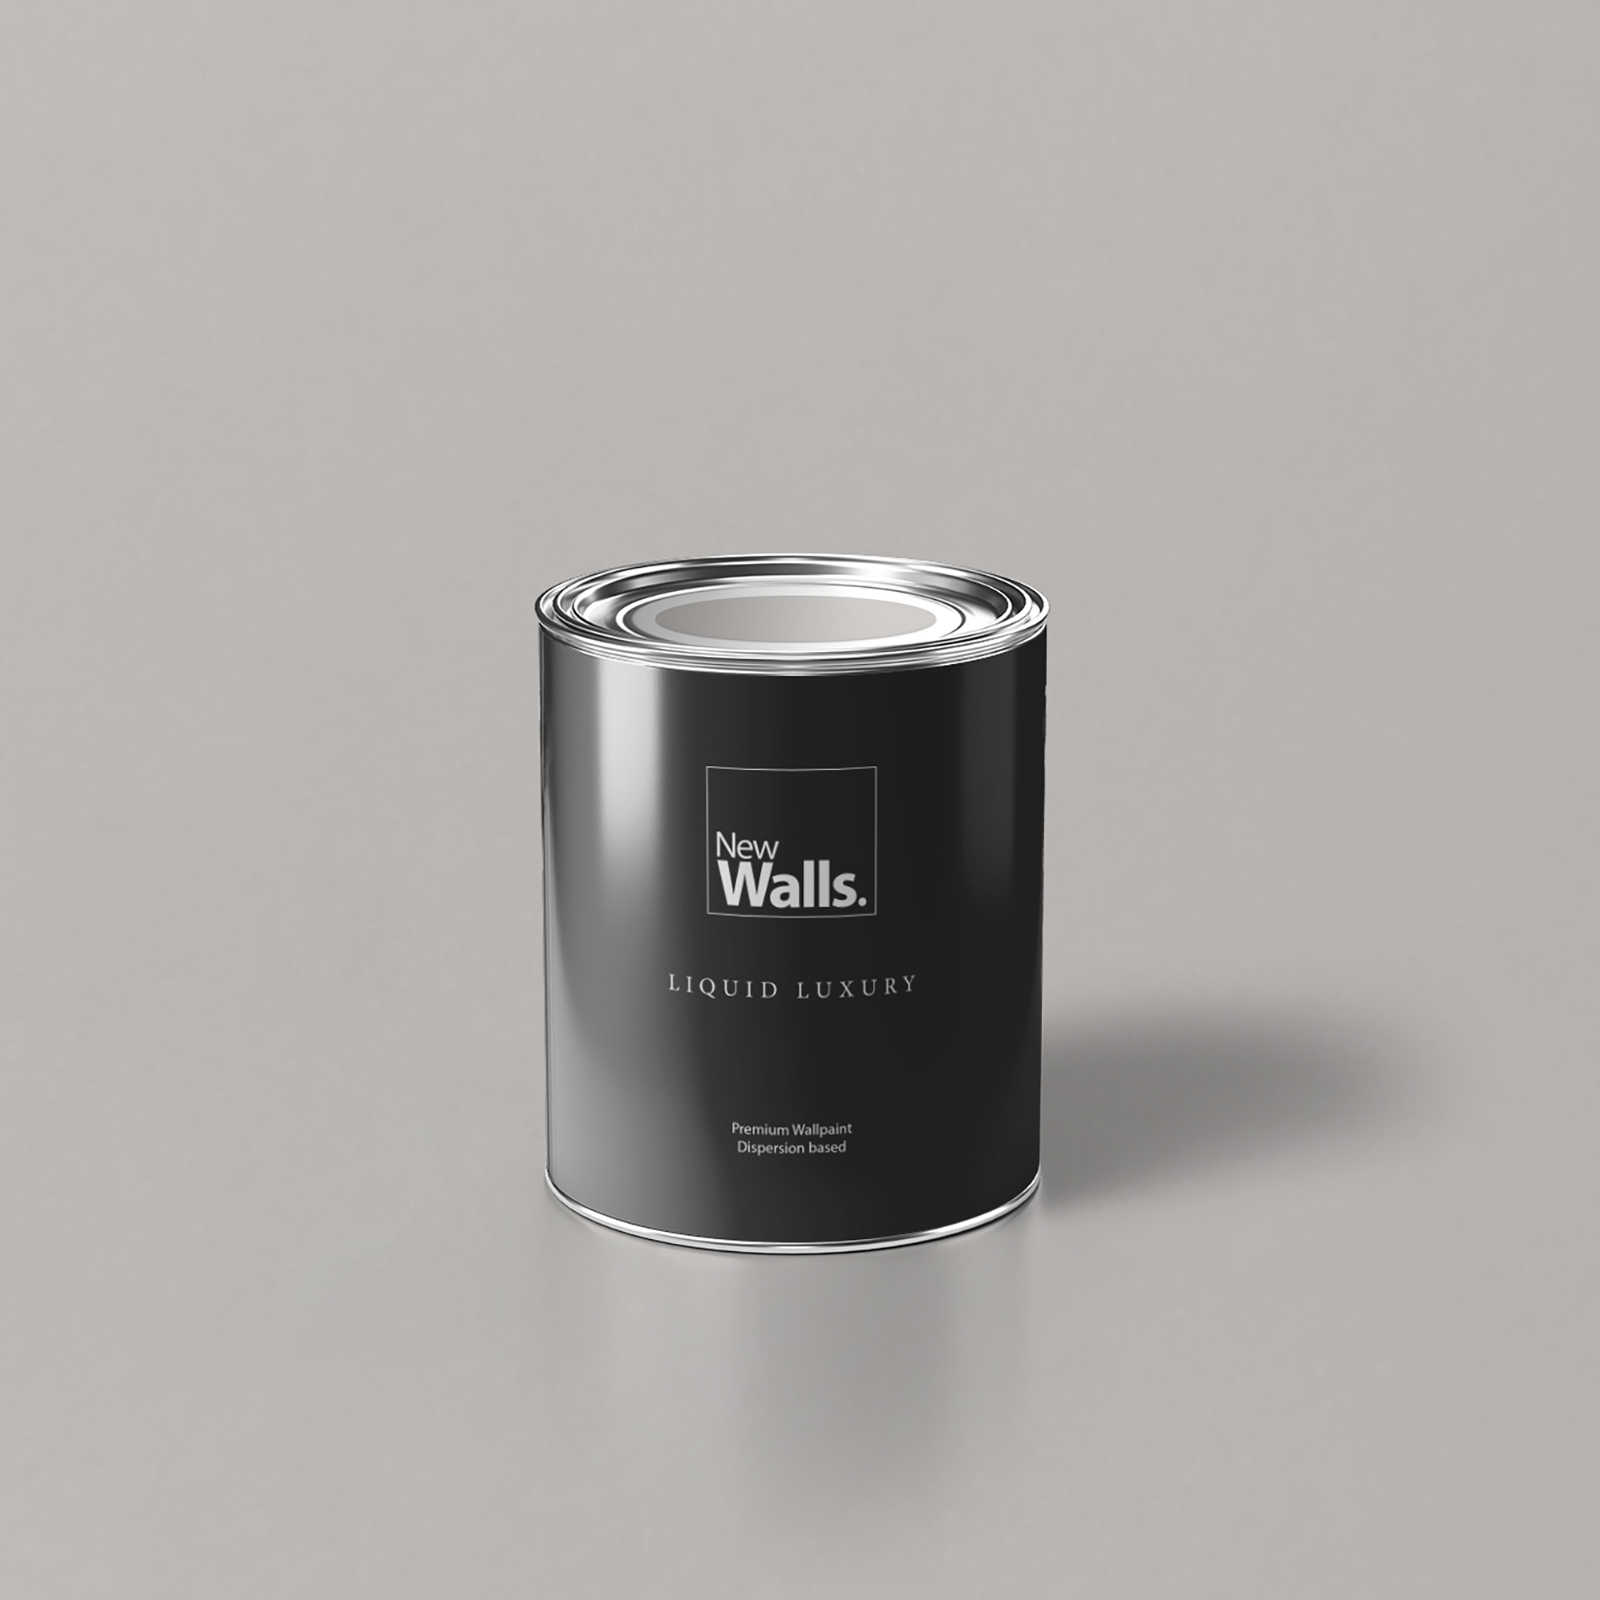         Premium Wall Paint soothing light grey »Creamy Grey« NW110 – 1 litre
    